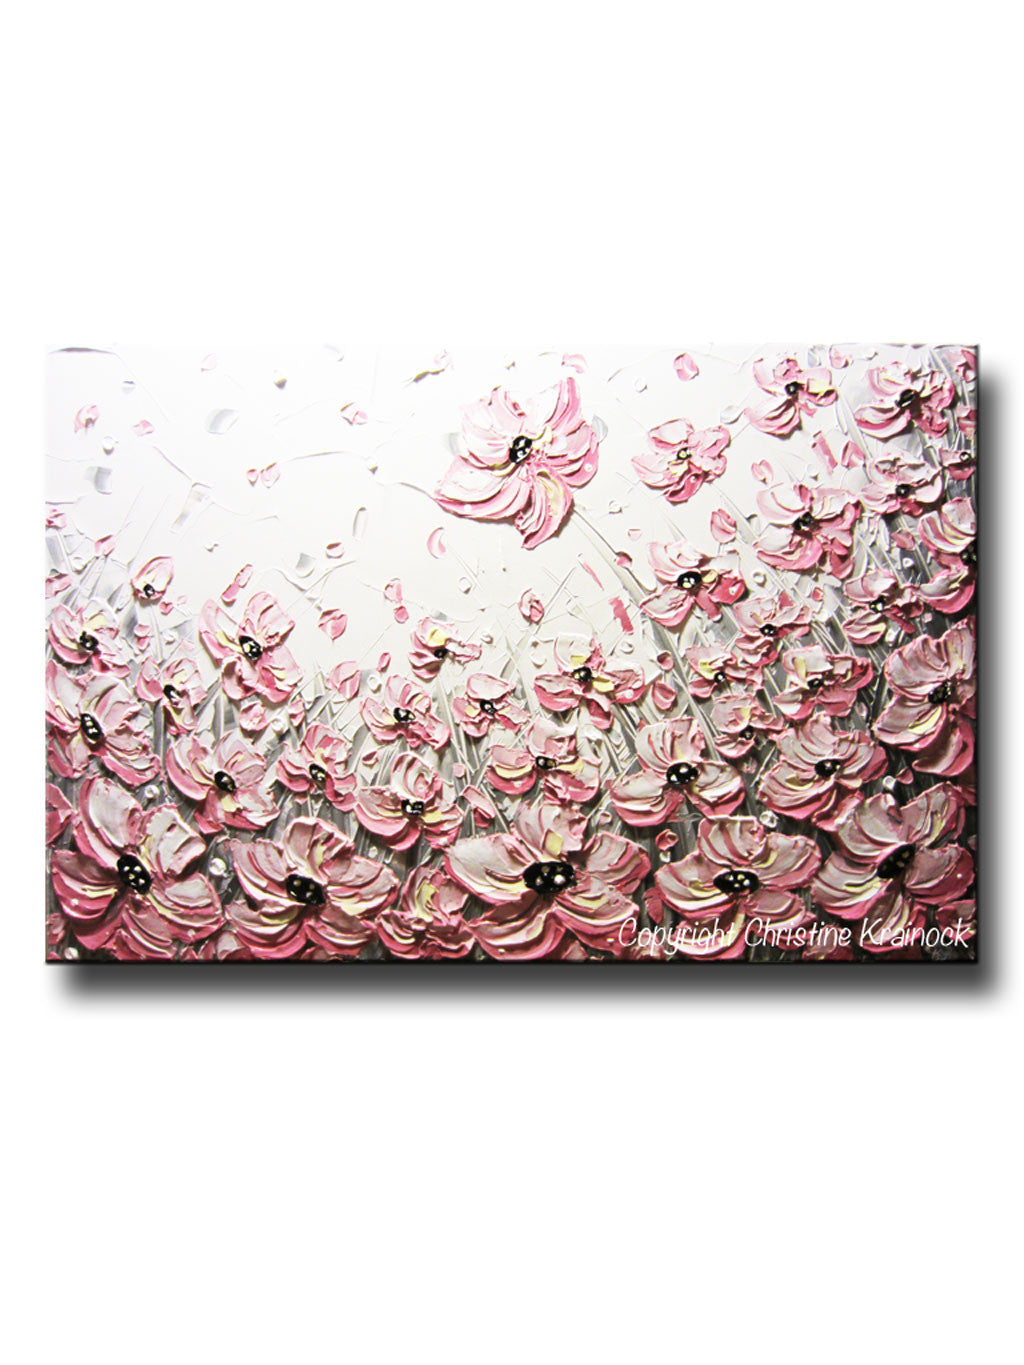 Canvas Print Abstract Painting Pink Grey White Neutral Floral Wall Art –  Contemporary Art by Christine